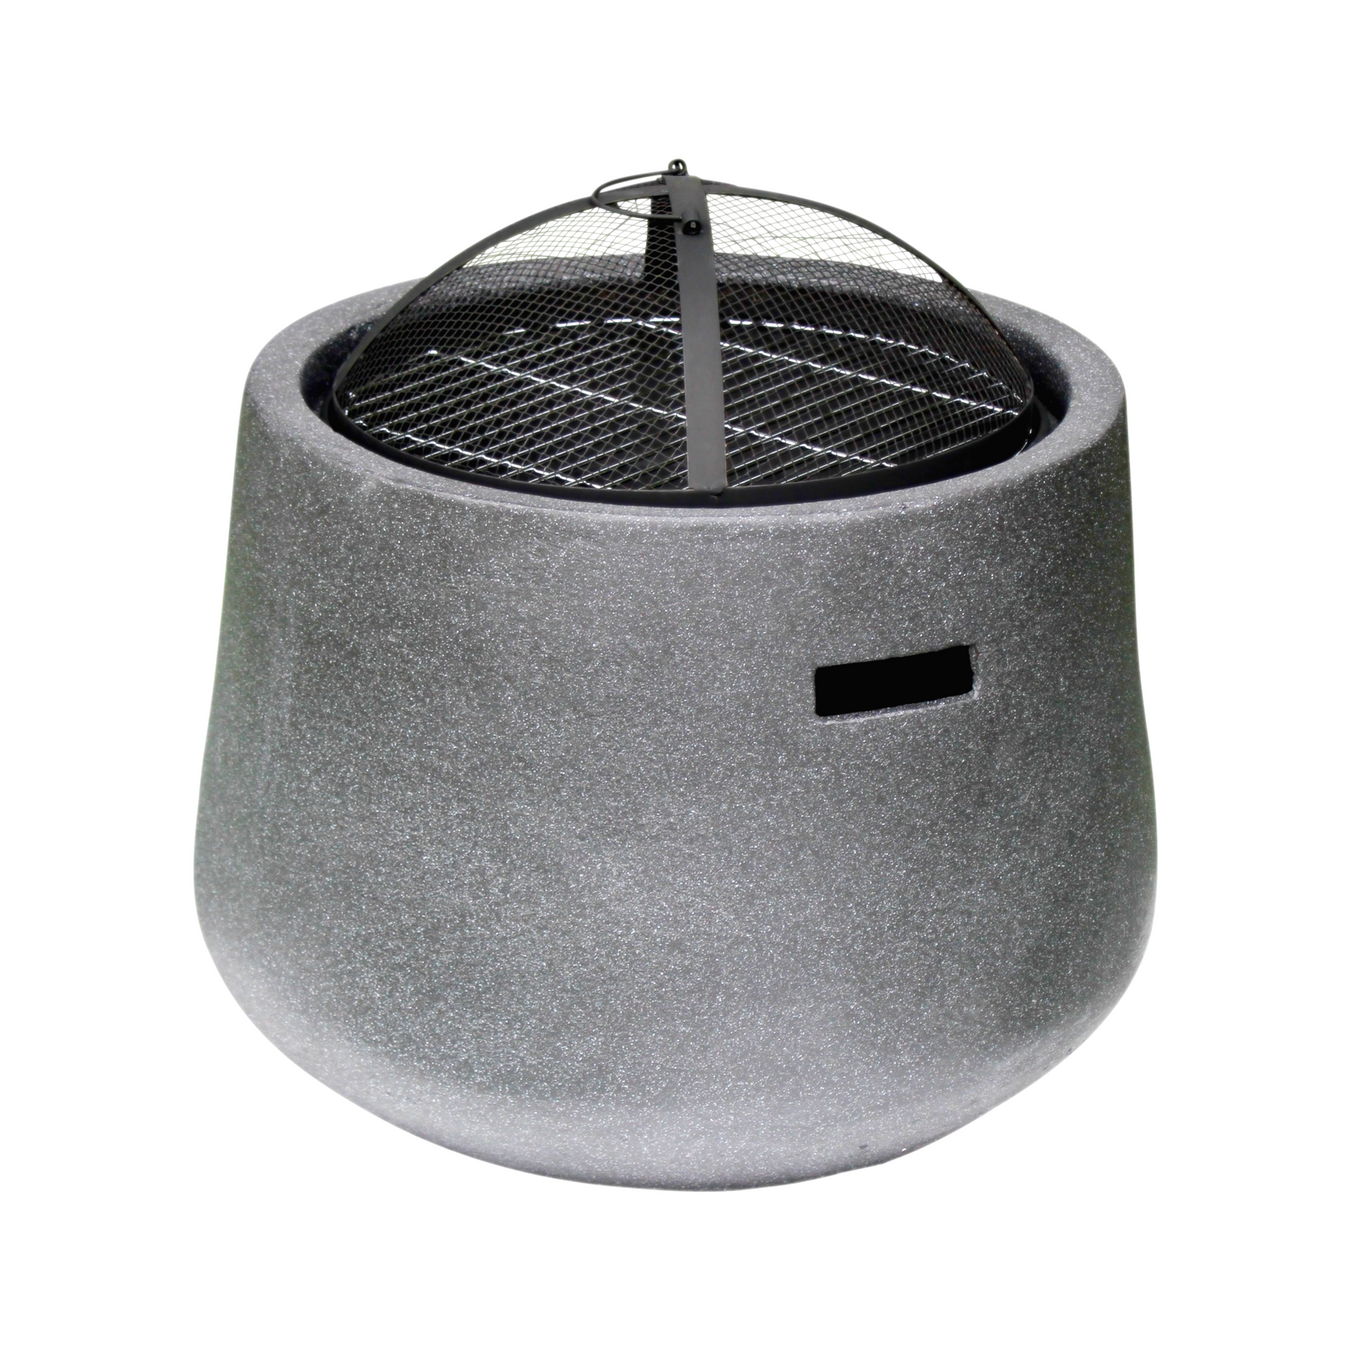 A round grey firepit with black grate on a white background.